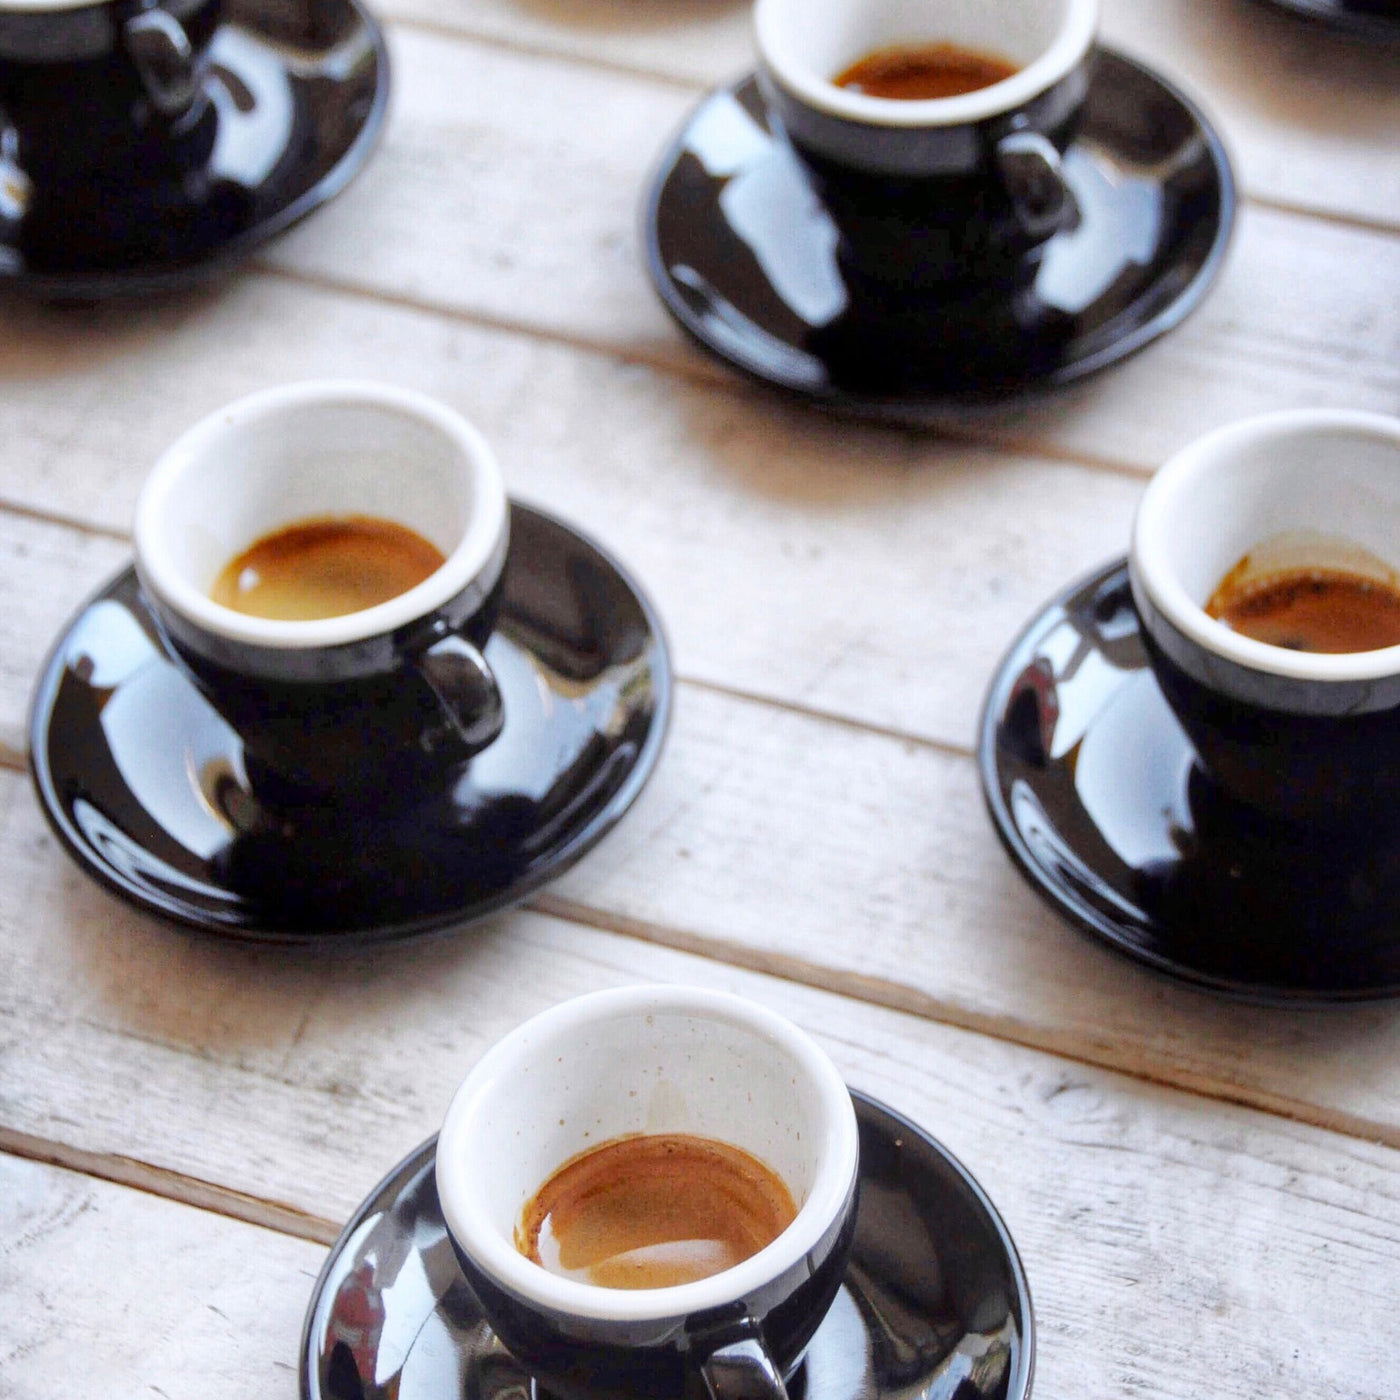 5 cups of espresso coffee in black cups on wooden table. 